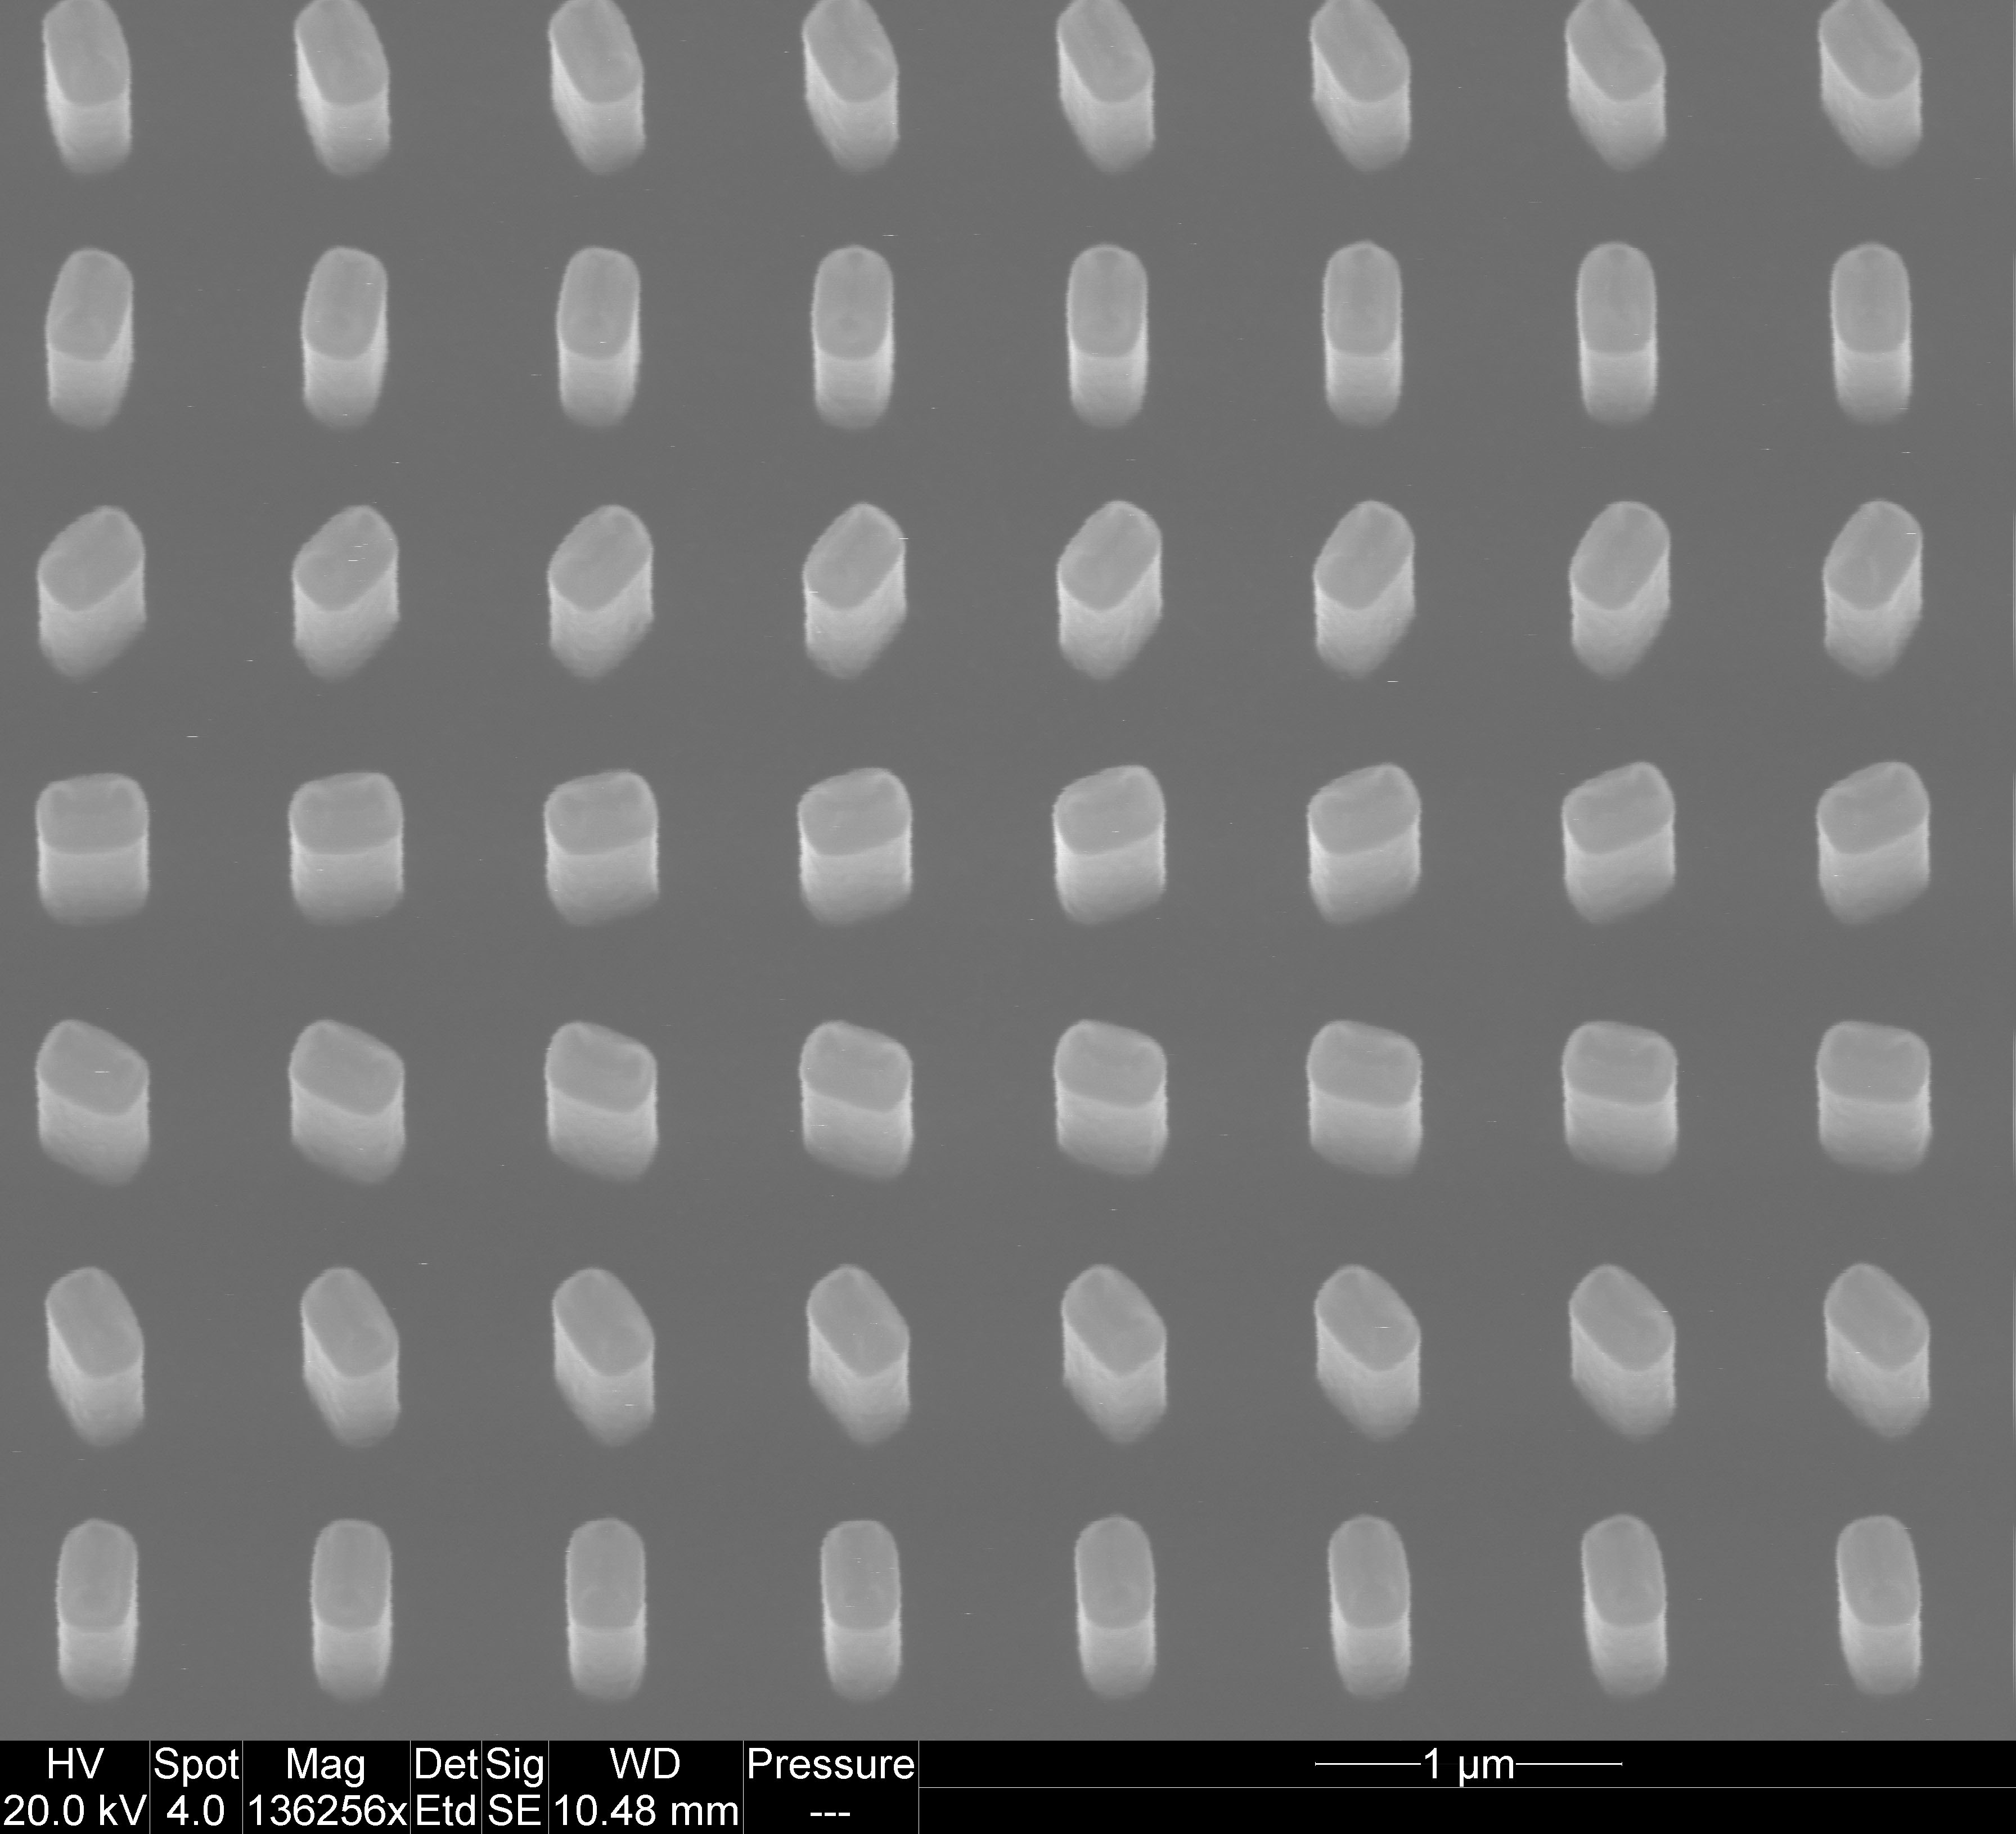 This electron microscopy image shows the nanostructure of the metasurface located at the center of the suspended silicon chip